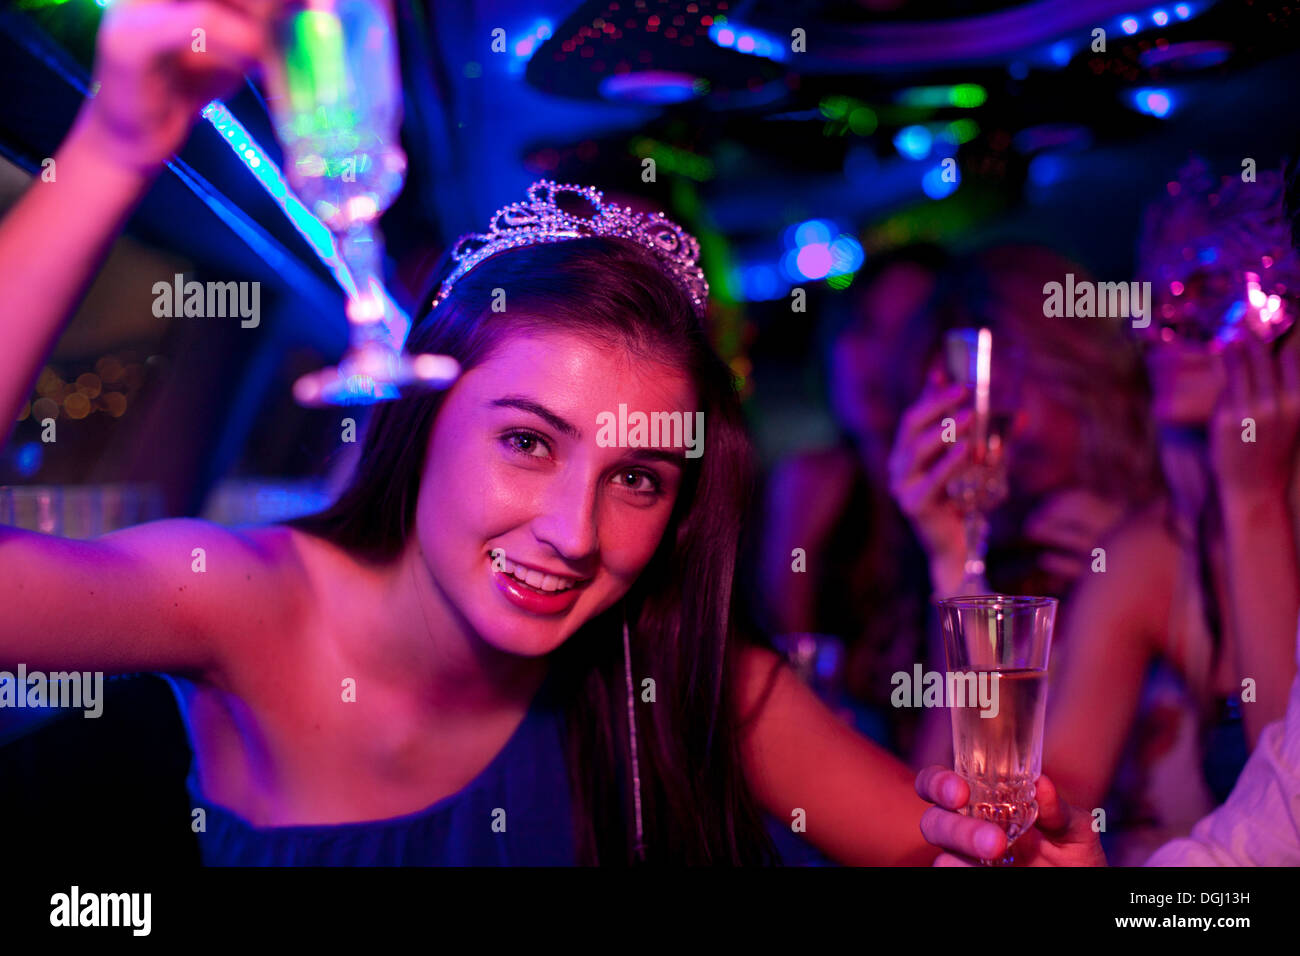 Young woman wearing tiara with wine glass in limousine Stock Photo